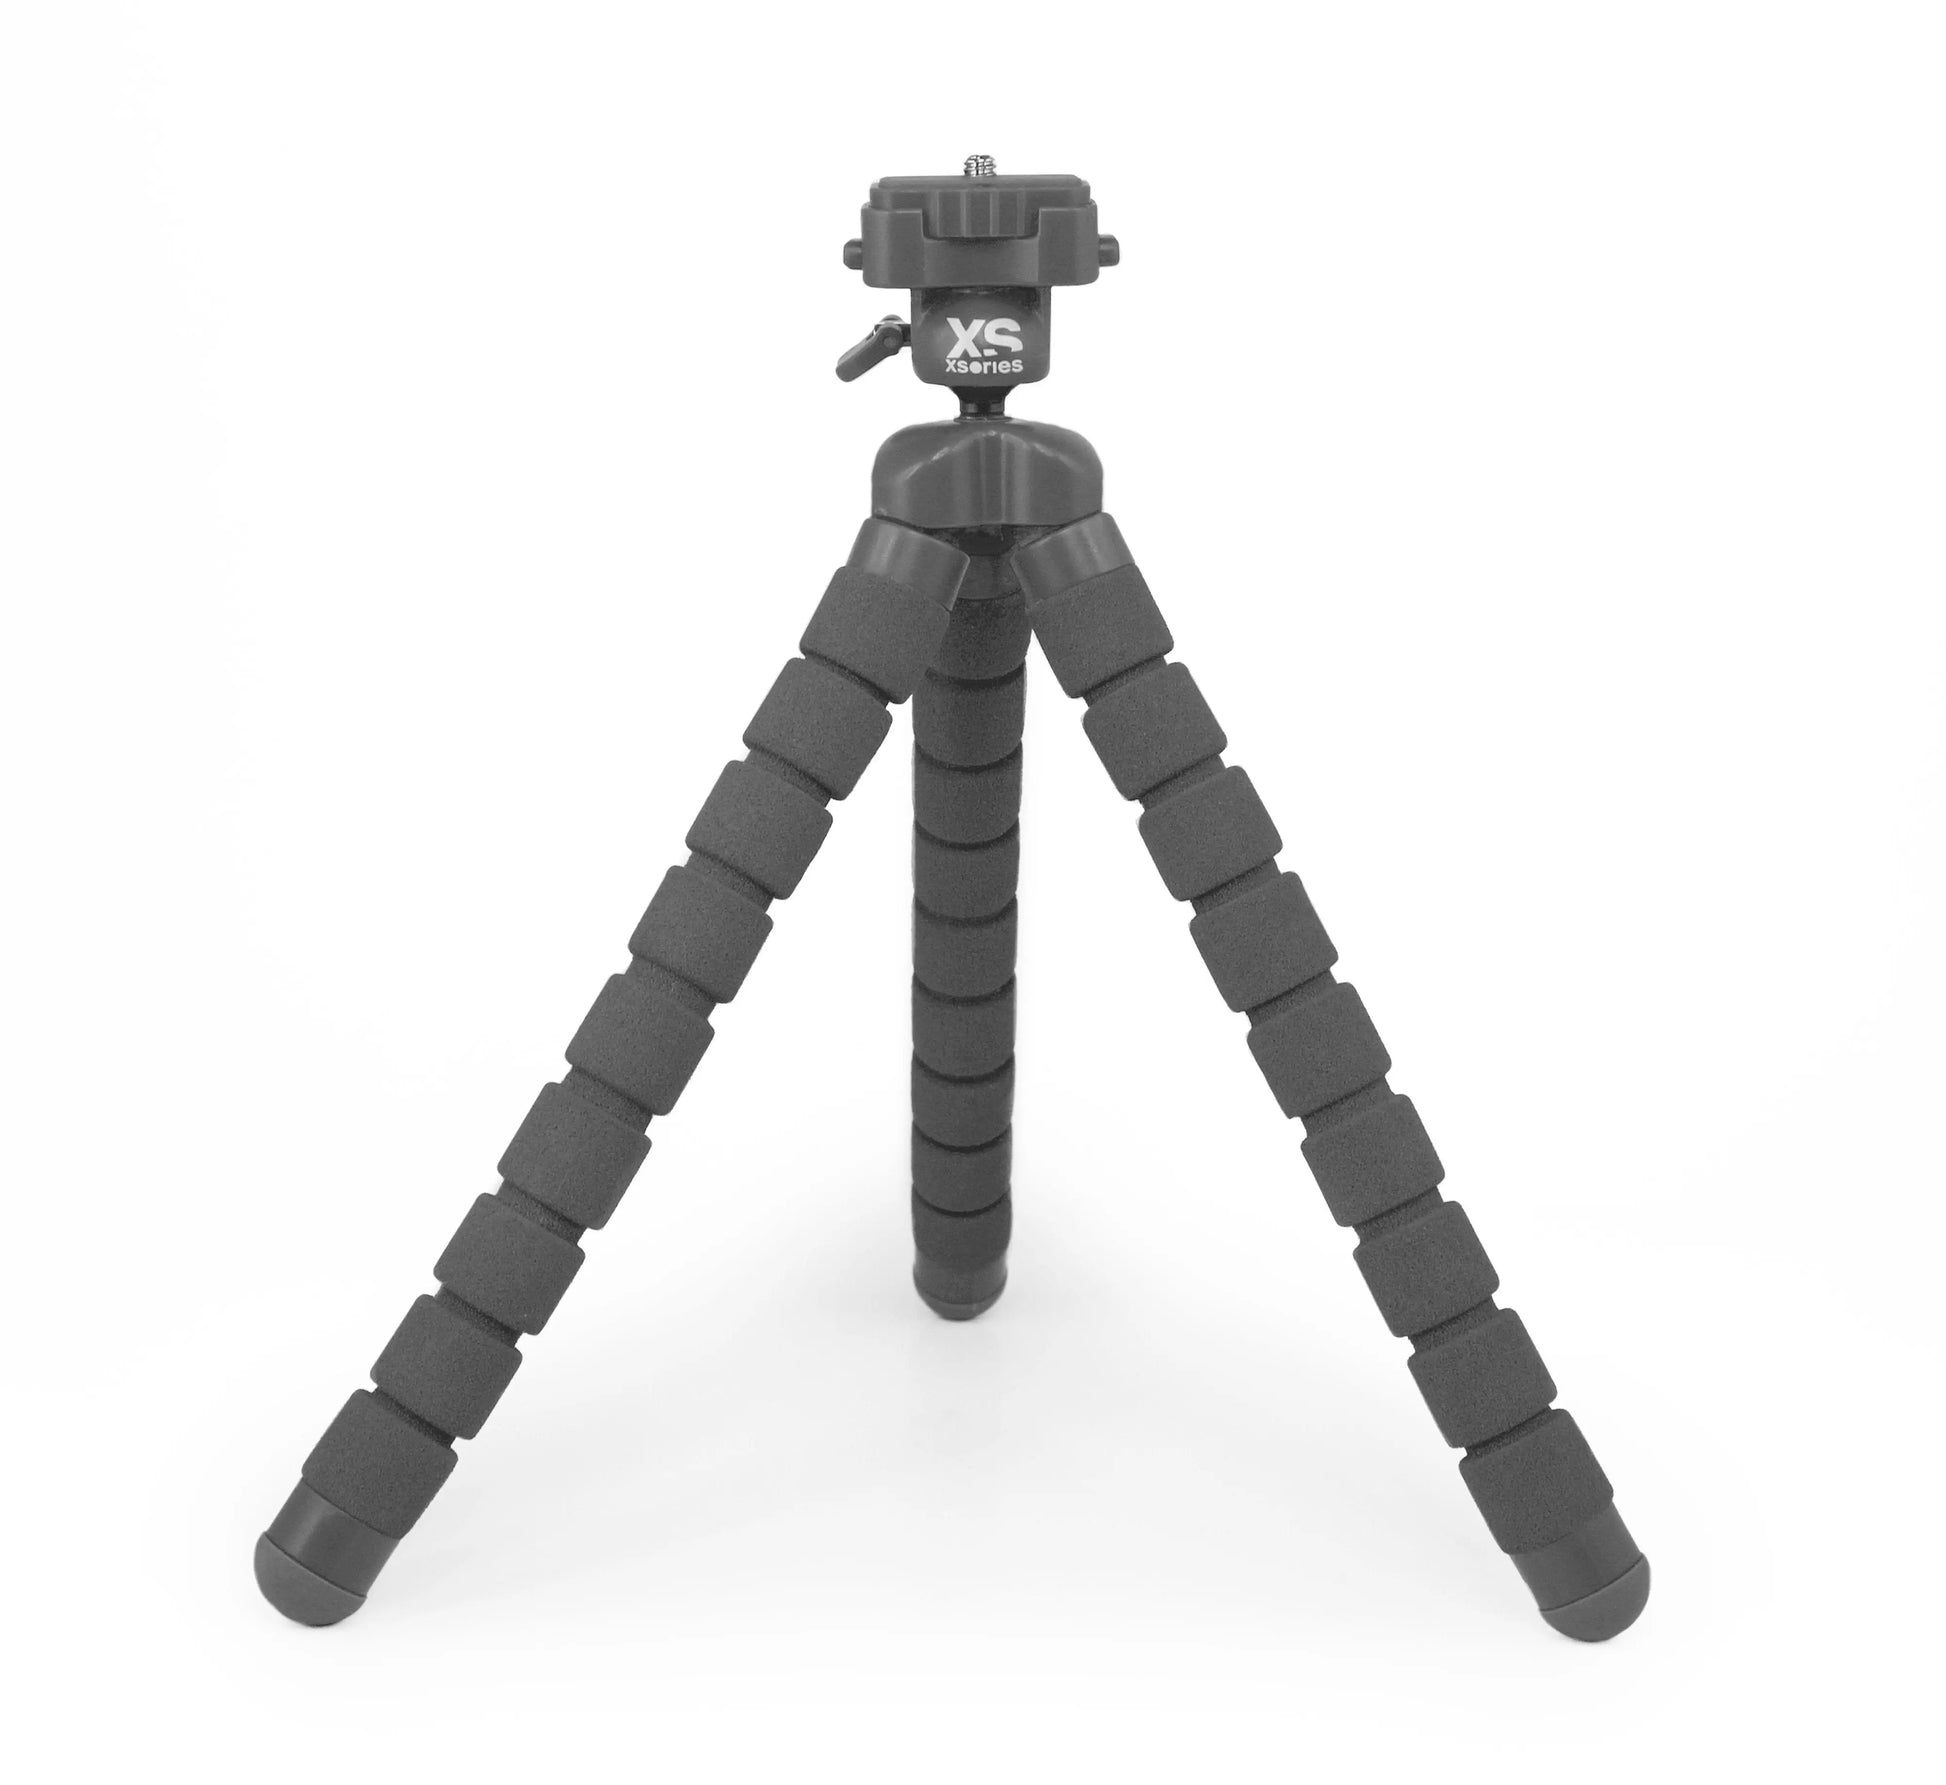 Camera Accessories - X-Sories Big Bendy Tripod With Ball Head (Colors Available In Black-Orange, Grey & Red)